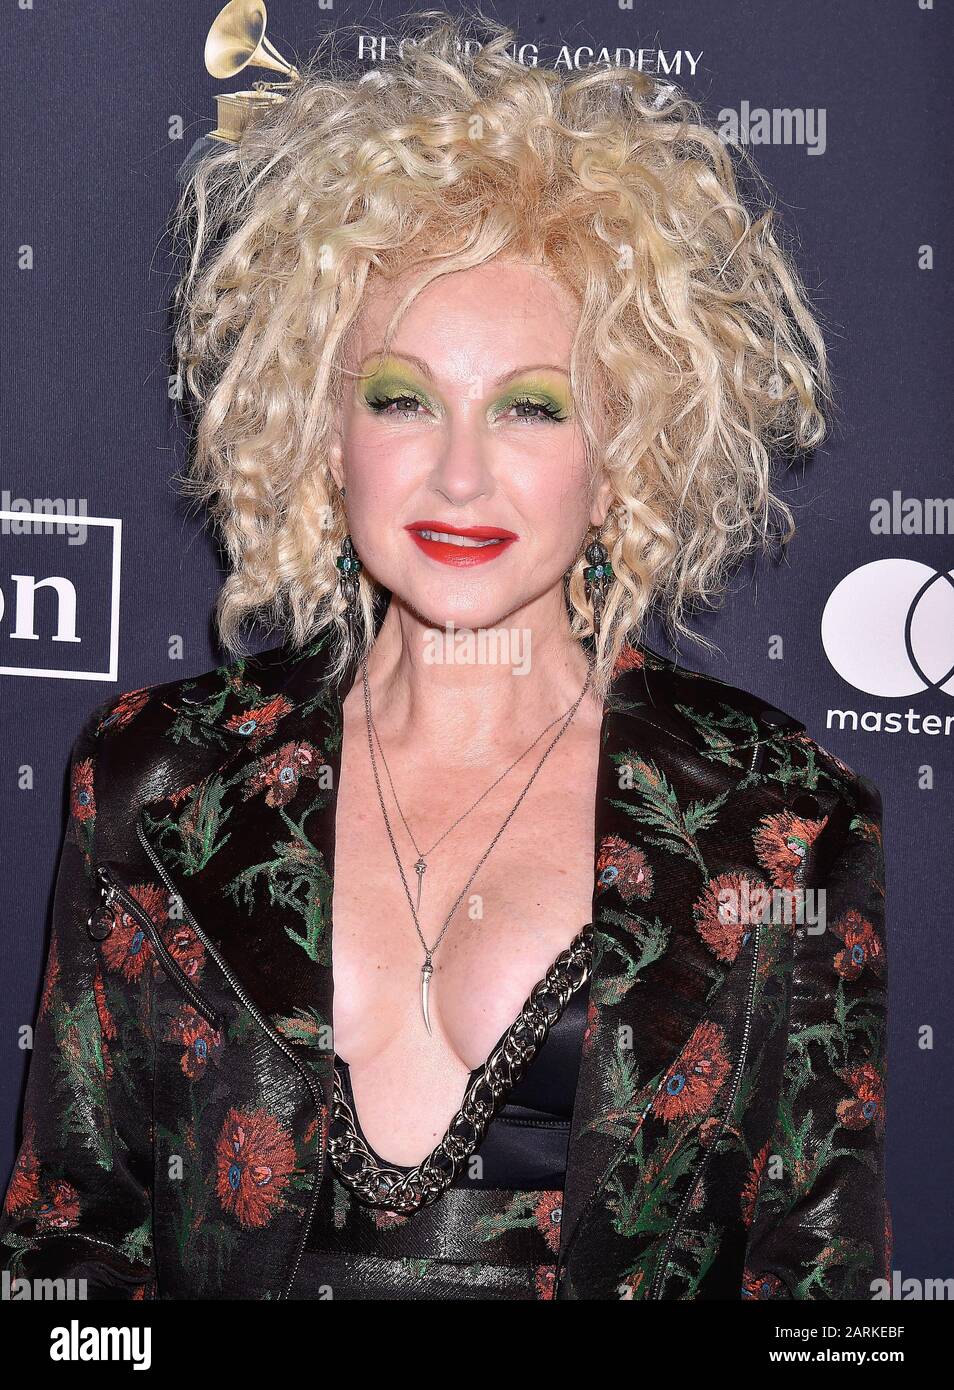 BEVERLY HILLS, CA - JANUARY 25: Cyndi Lauper attends the Pre-GRAMMY Gala and GRAMMY Salute to Industry Icons Honoring Sean 'Diddy' Combs on January 25, 2020 in Beverly Hills, California. Stock Photo